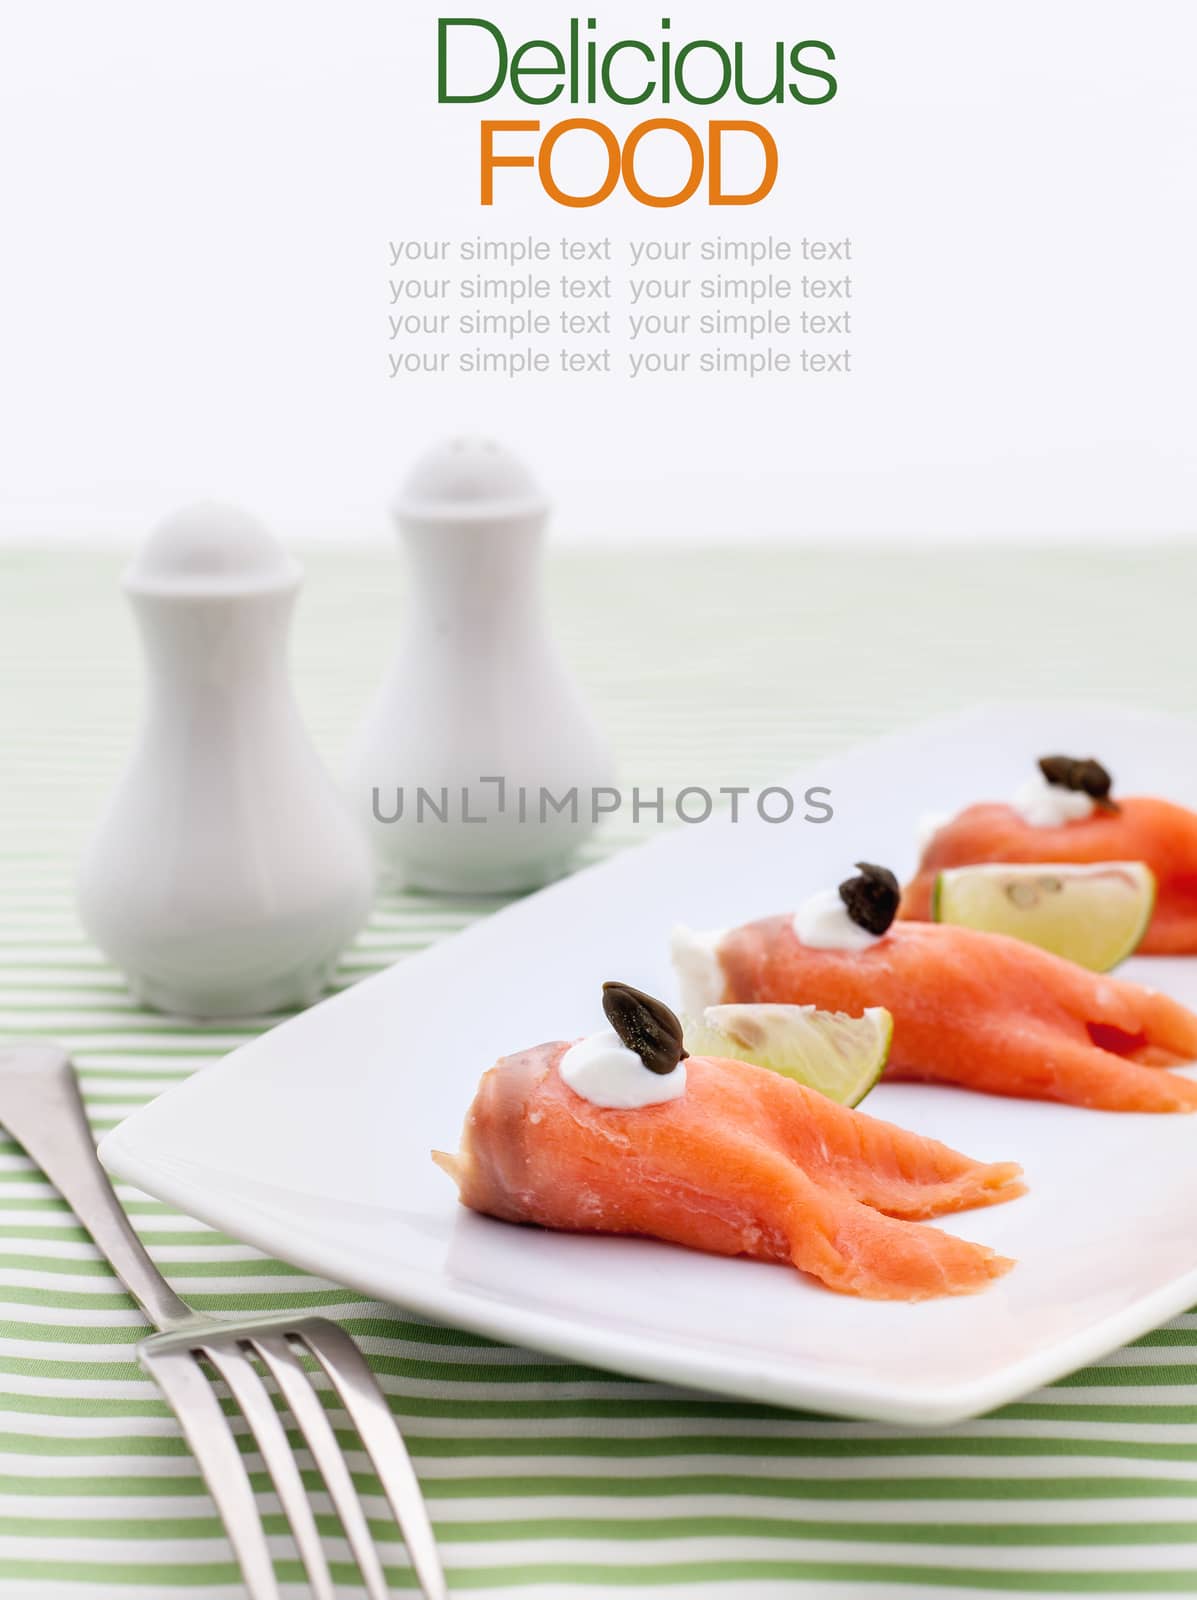 Smoked salmon roll with cream cheese.